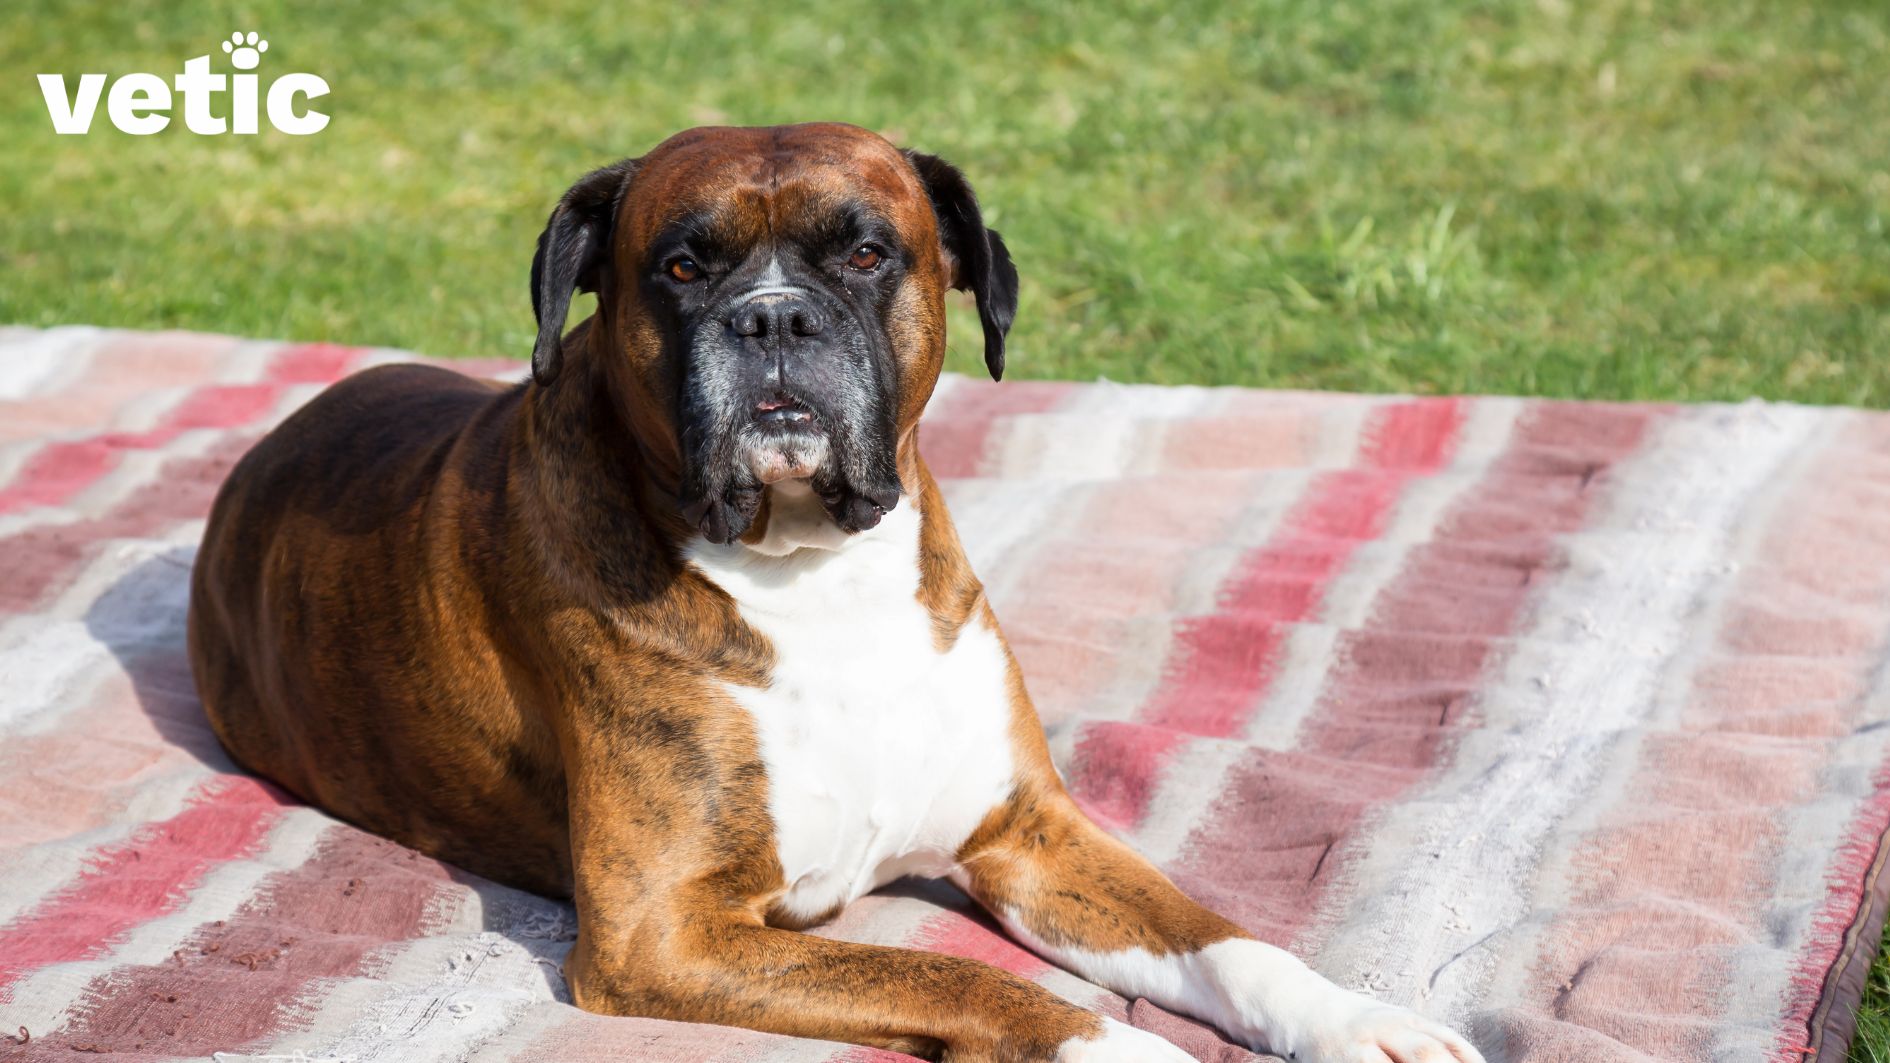 A boxer breed dog adult sitting on a pink, rust and white striped blanket placed on the grass. The dog is looking at the camera with a puzzled look...but that's just their face.